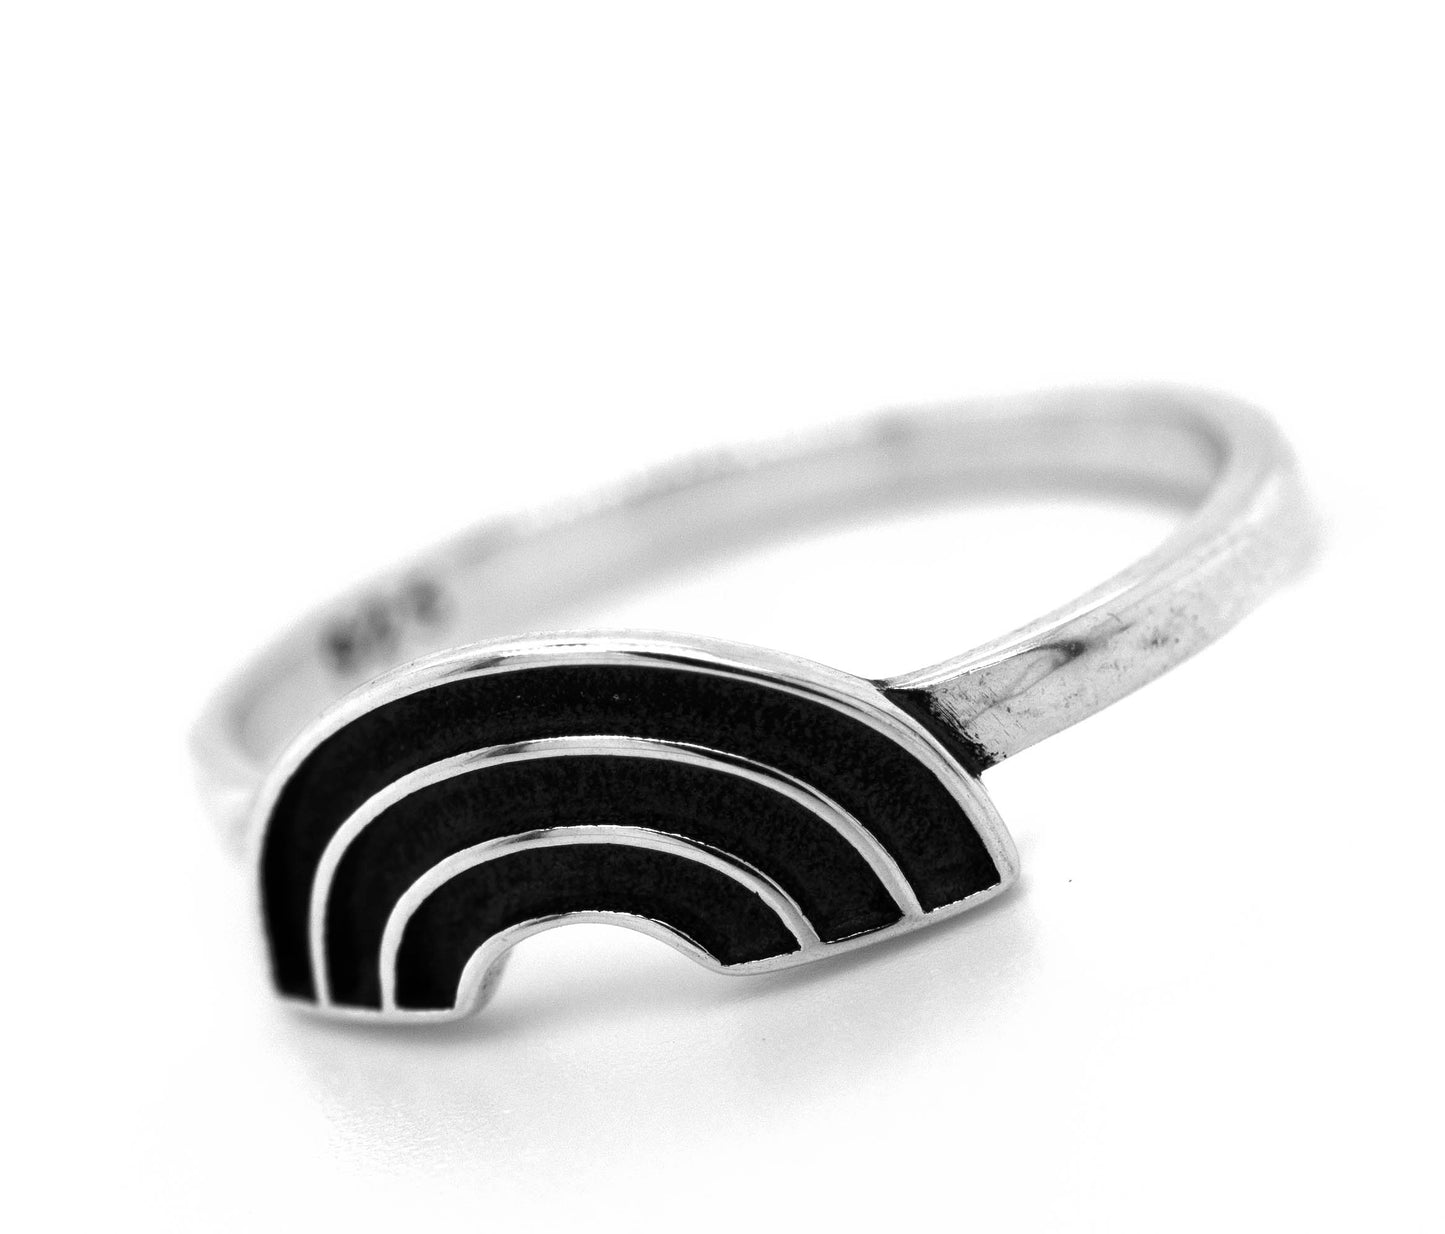 A Super Silver Rainbow Ring showcasing the vibrancy of diversity with a rainbow in the middle.